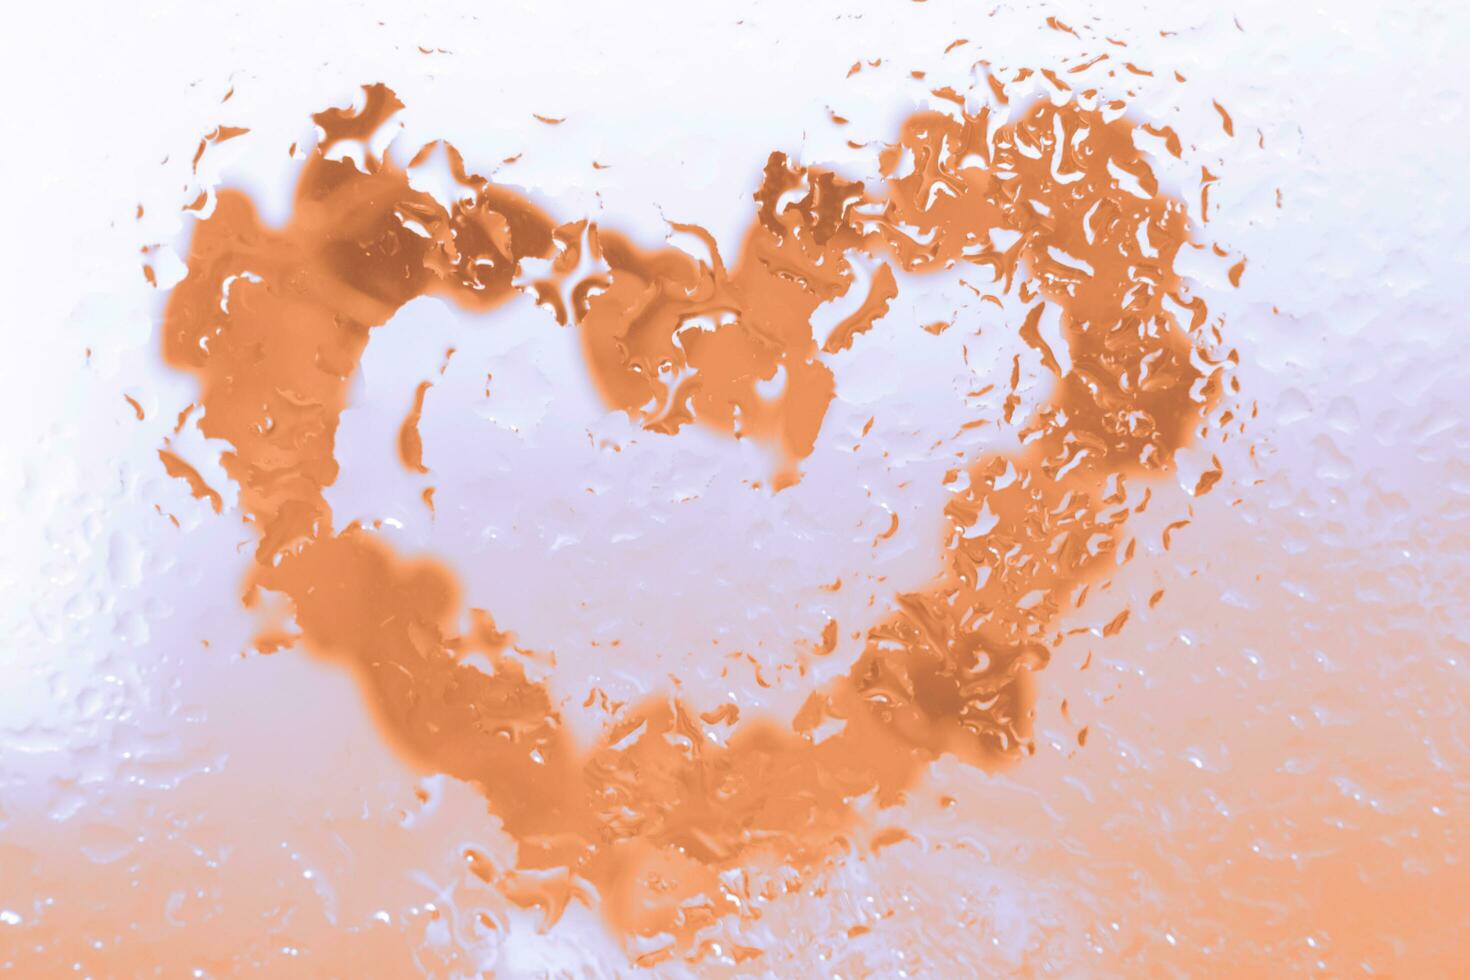 Peach Fuzz heart under glass surface with water drops close. Valentines background, photo